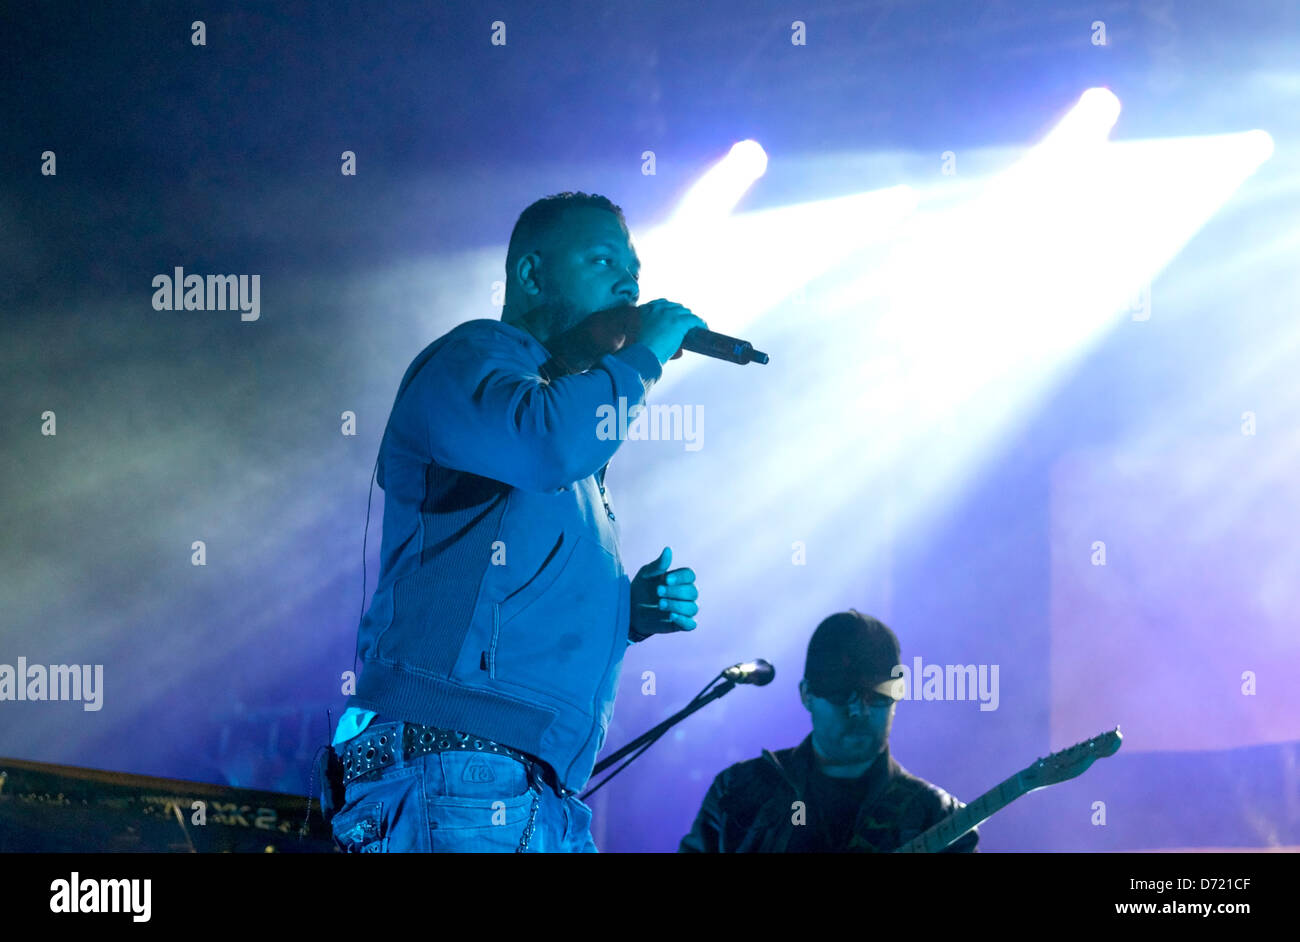 April 24 2013. Boss AC and his band performs in Almada in a concert for 25 April day commemoration. The image shows a Boss AC portrait during the concert. Credit: Bruno Monico/Alamy Live News Stock Photo